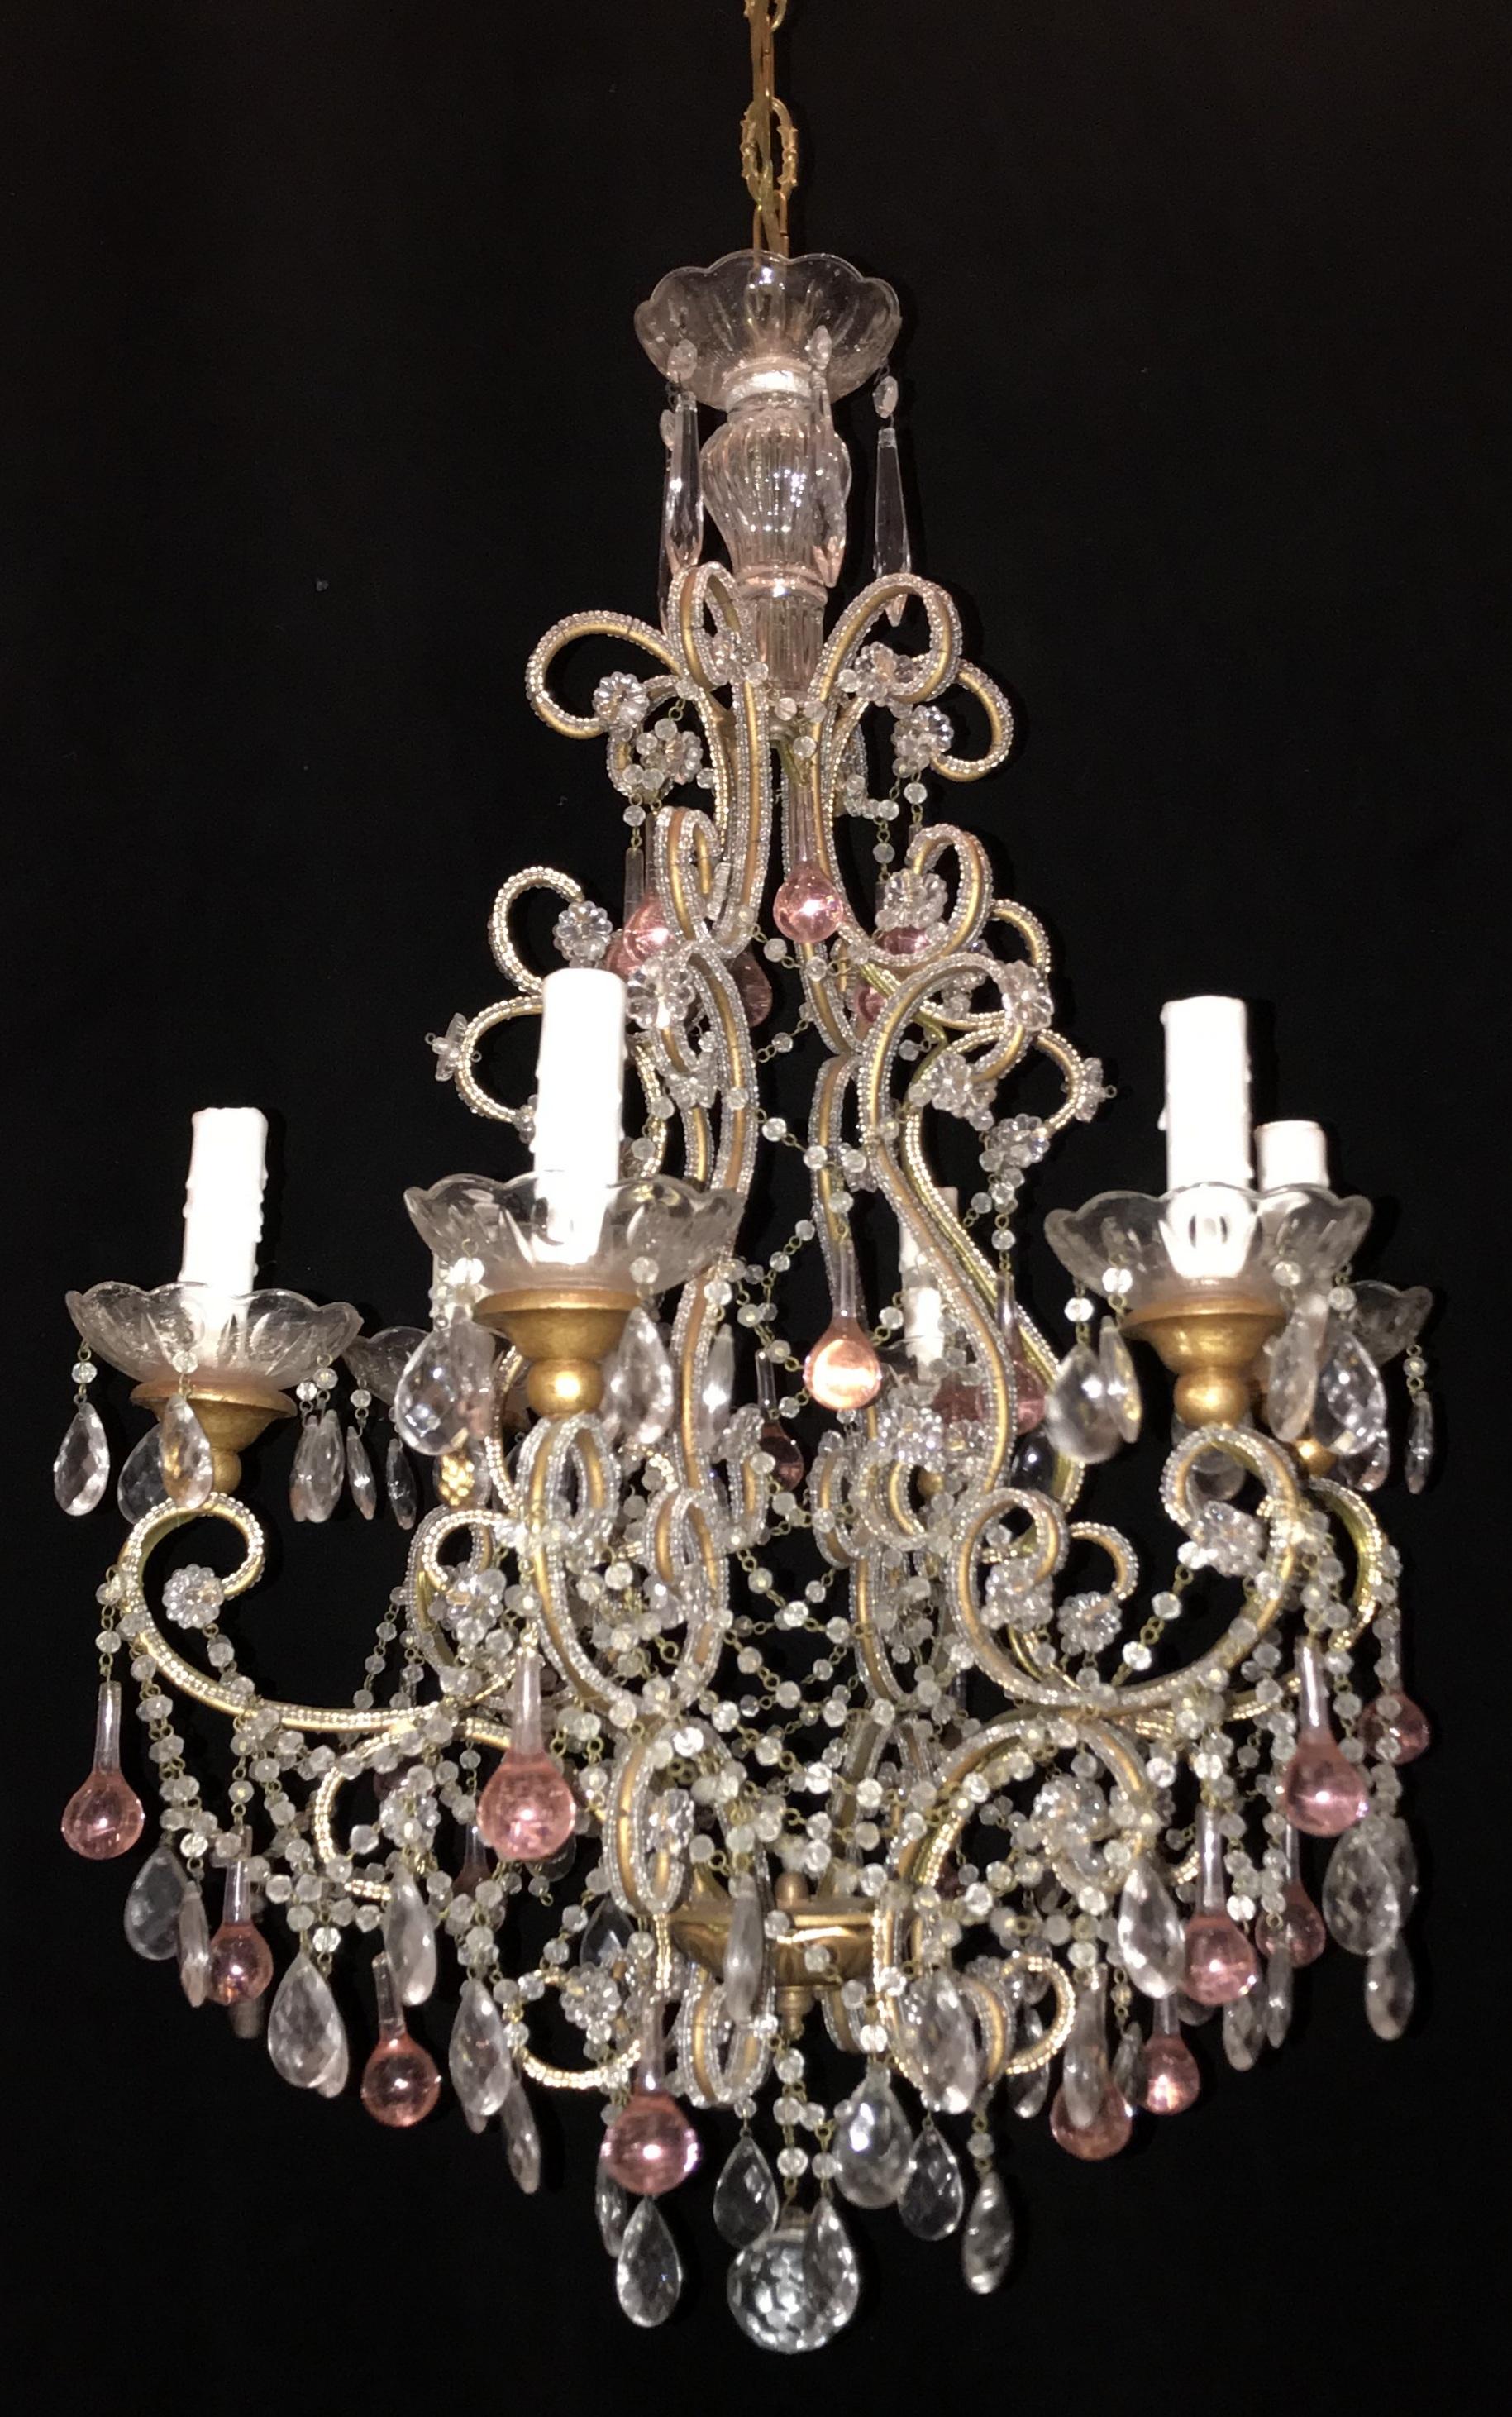 Wonderful beaded Italian giltwood cups and adorned with pink tear drop in a bird cage form chandelier with six candelabra lights, this fixture was purchased from the previous estate of Marc Anthony and Jennifer Lopez.
Measures: 19